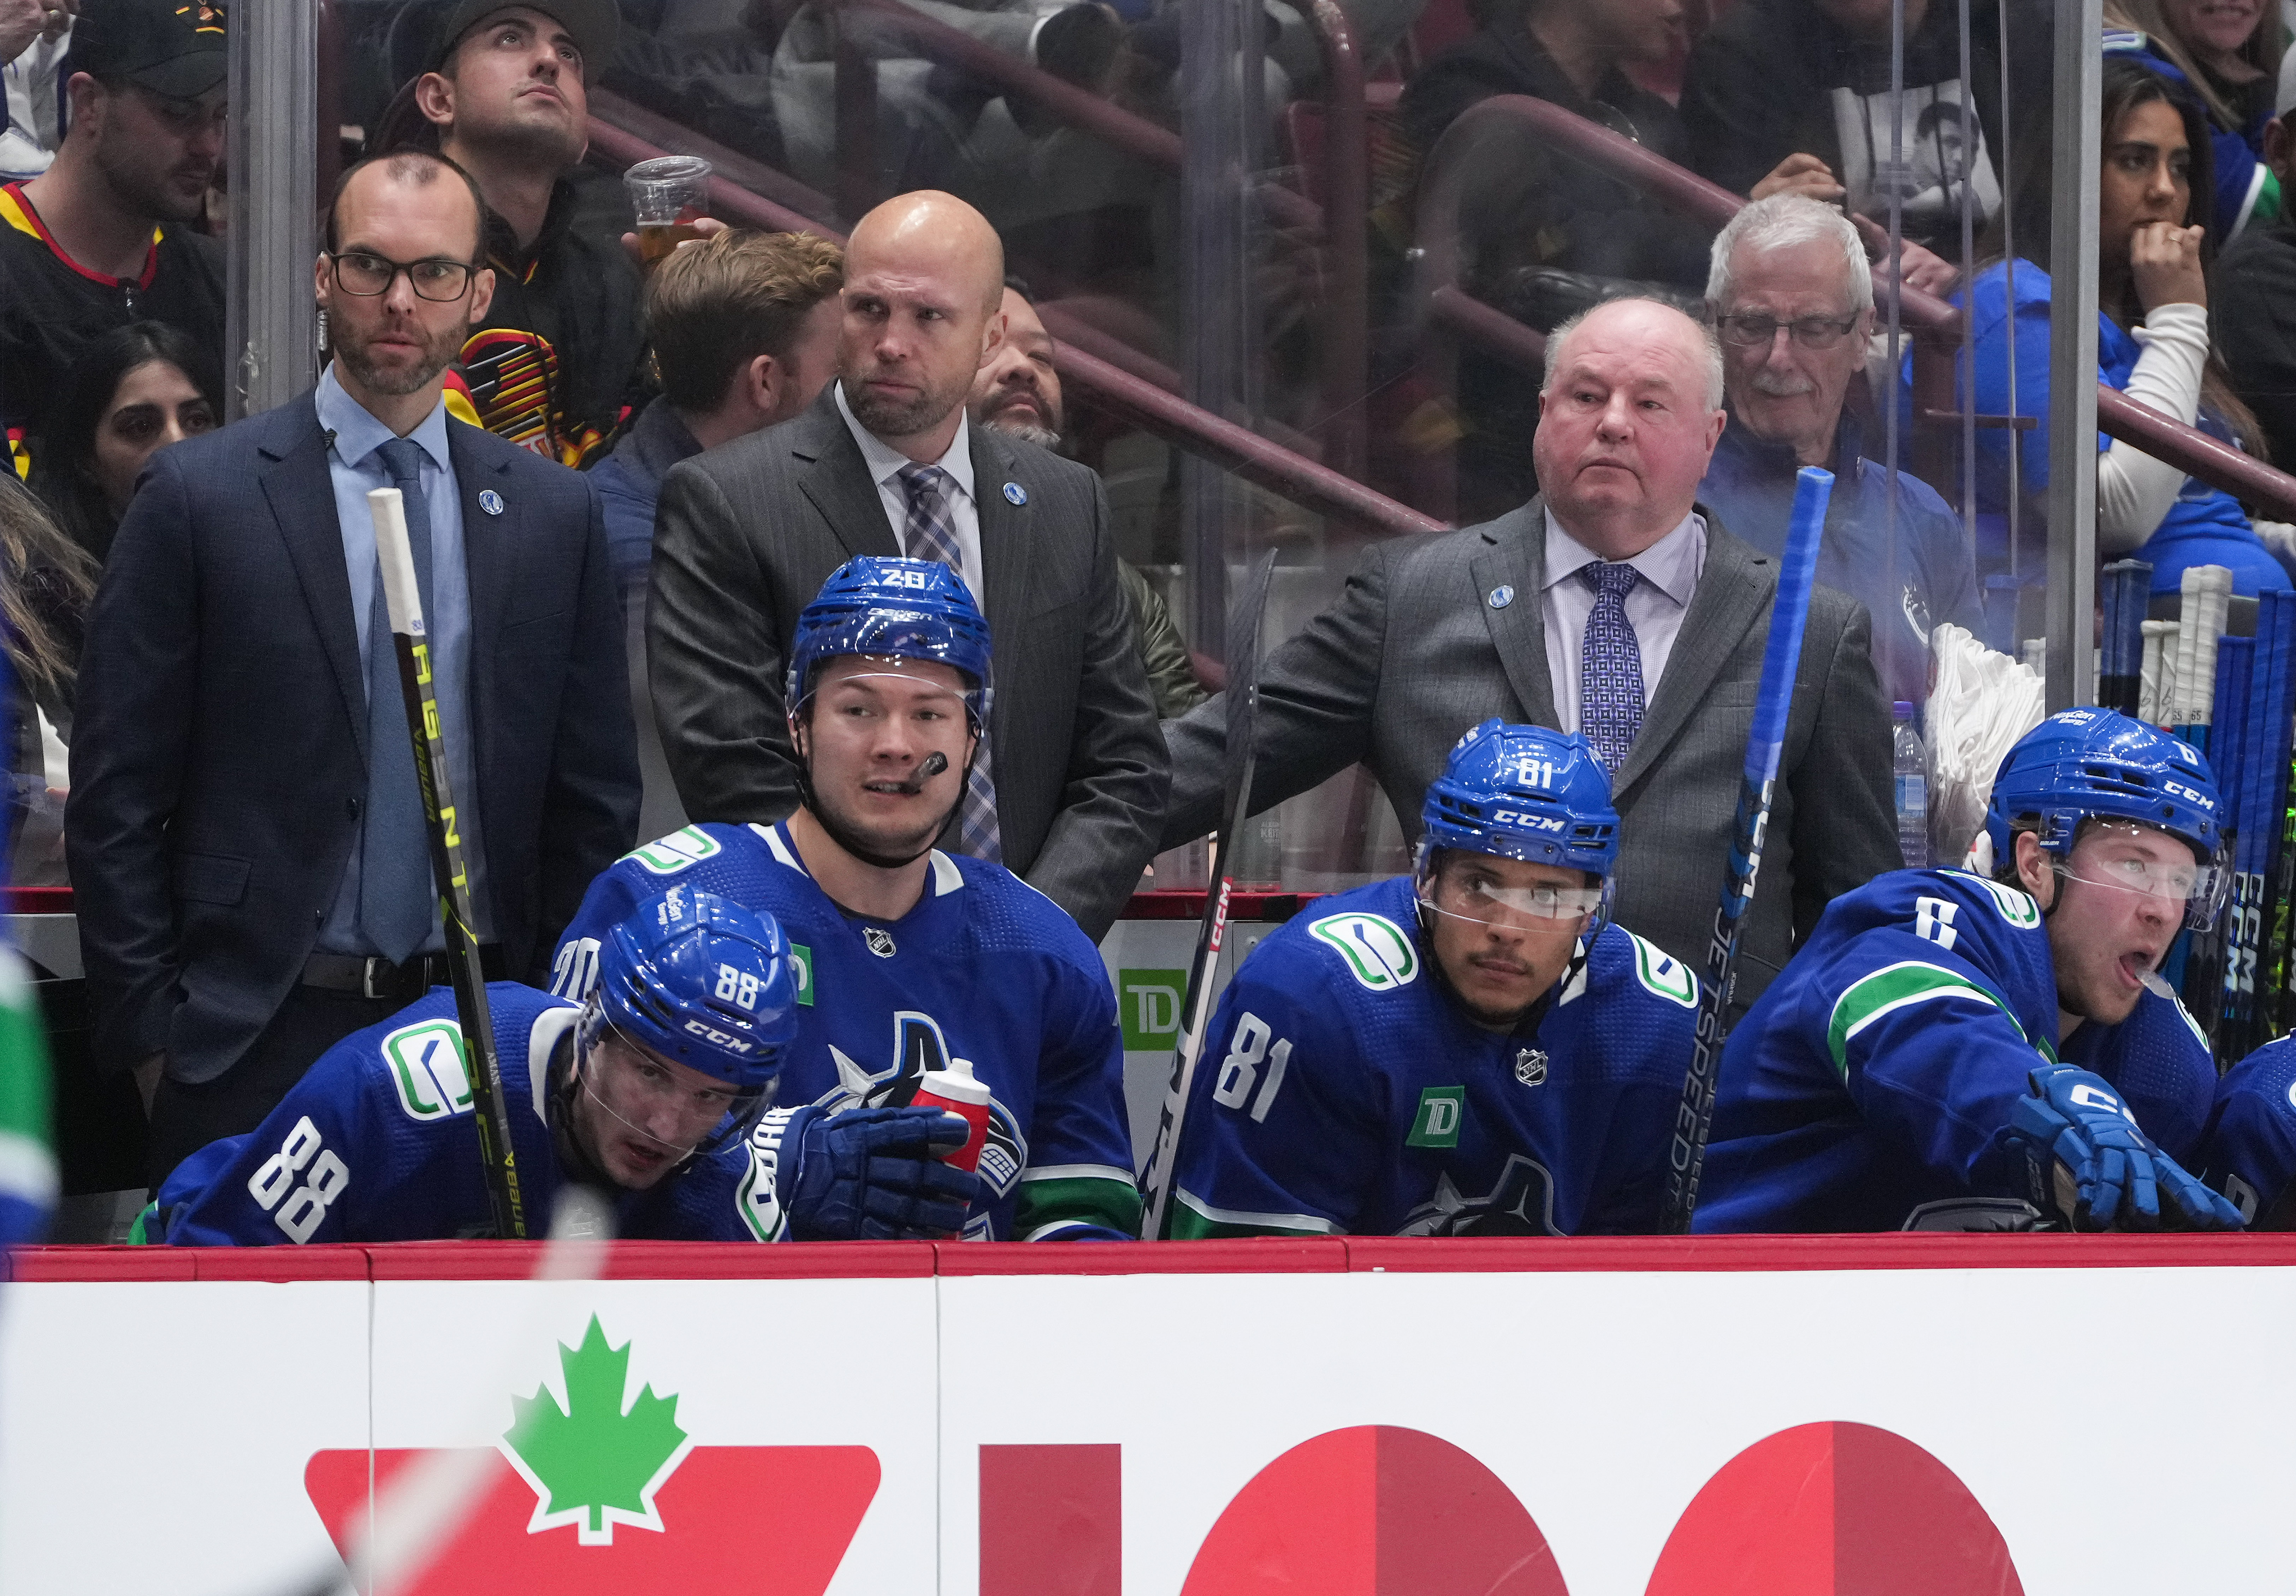 Vancouver Canucks - Nothing kicks off Chinese New Year like